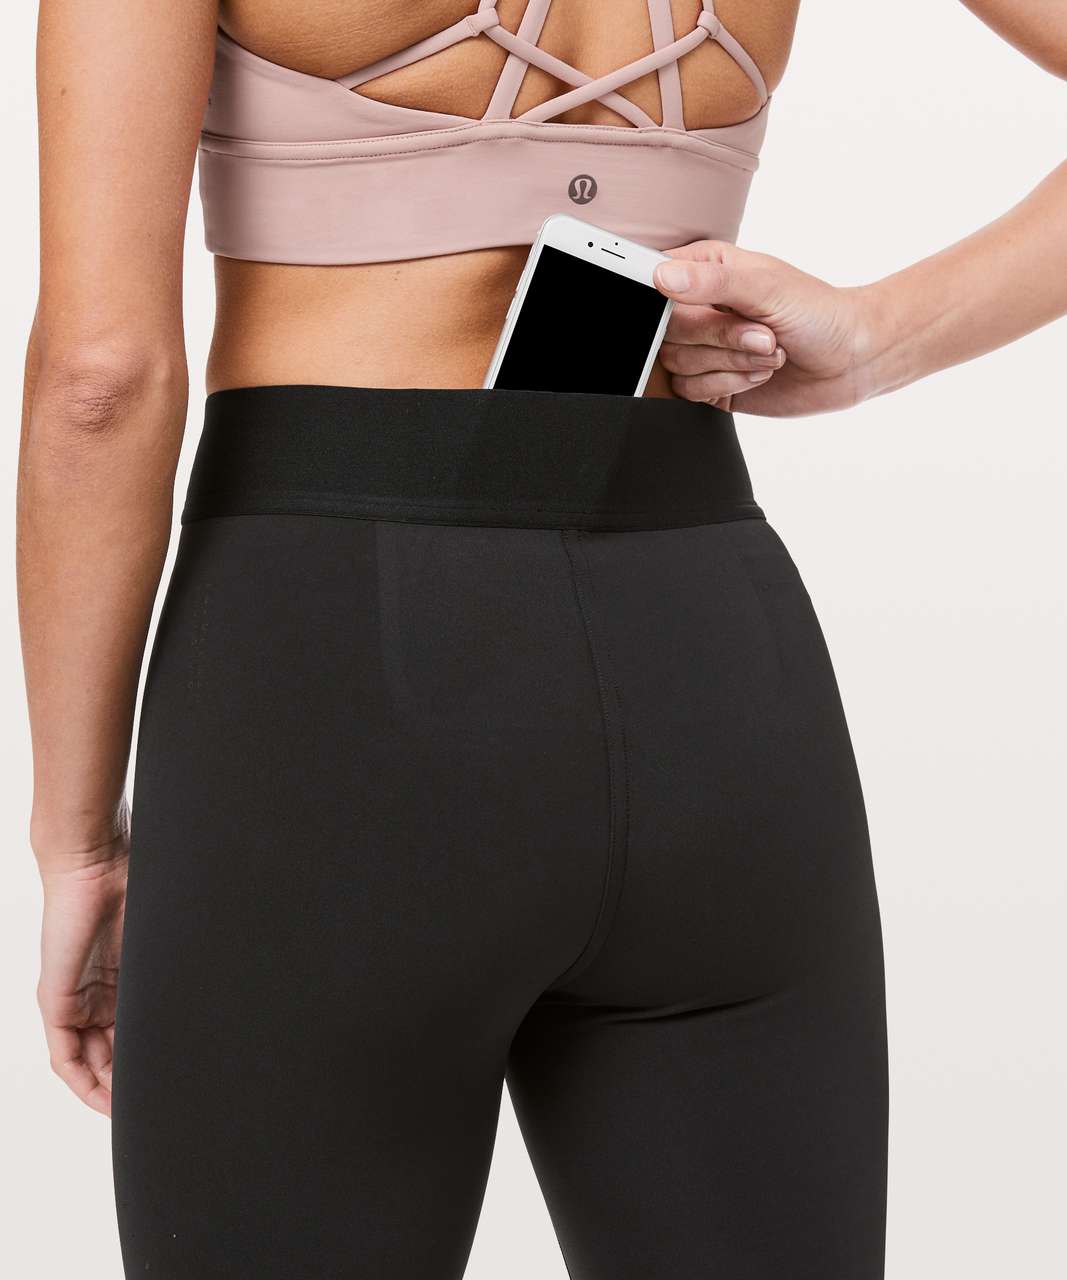 SoulCycle by Lululemon Women's Clothing On Sale Up To 90% Off Retail